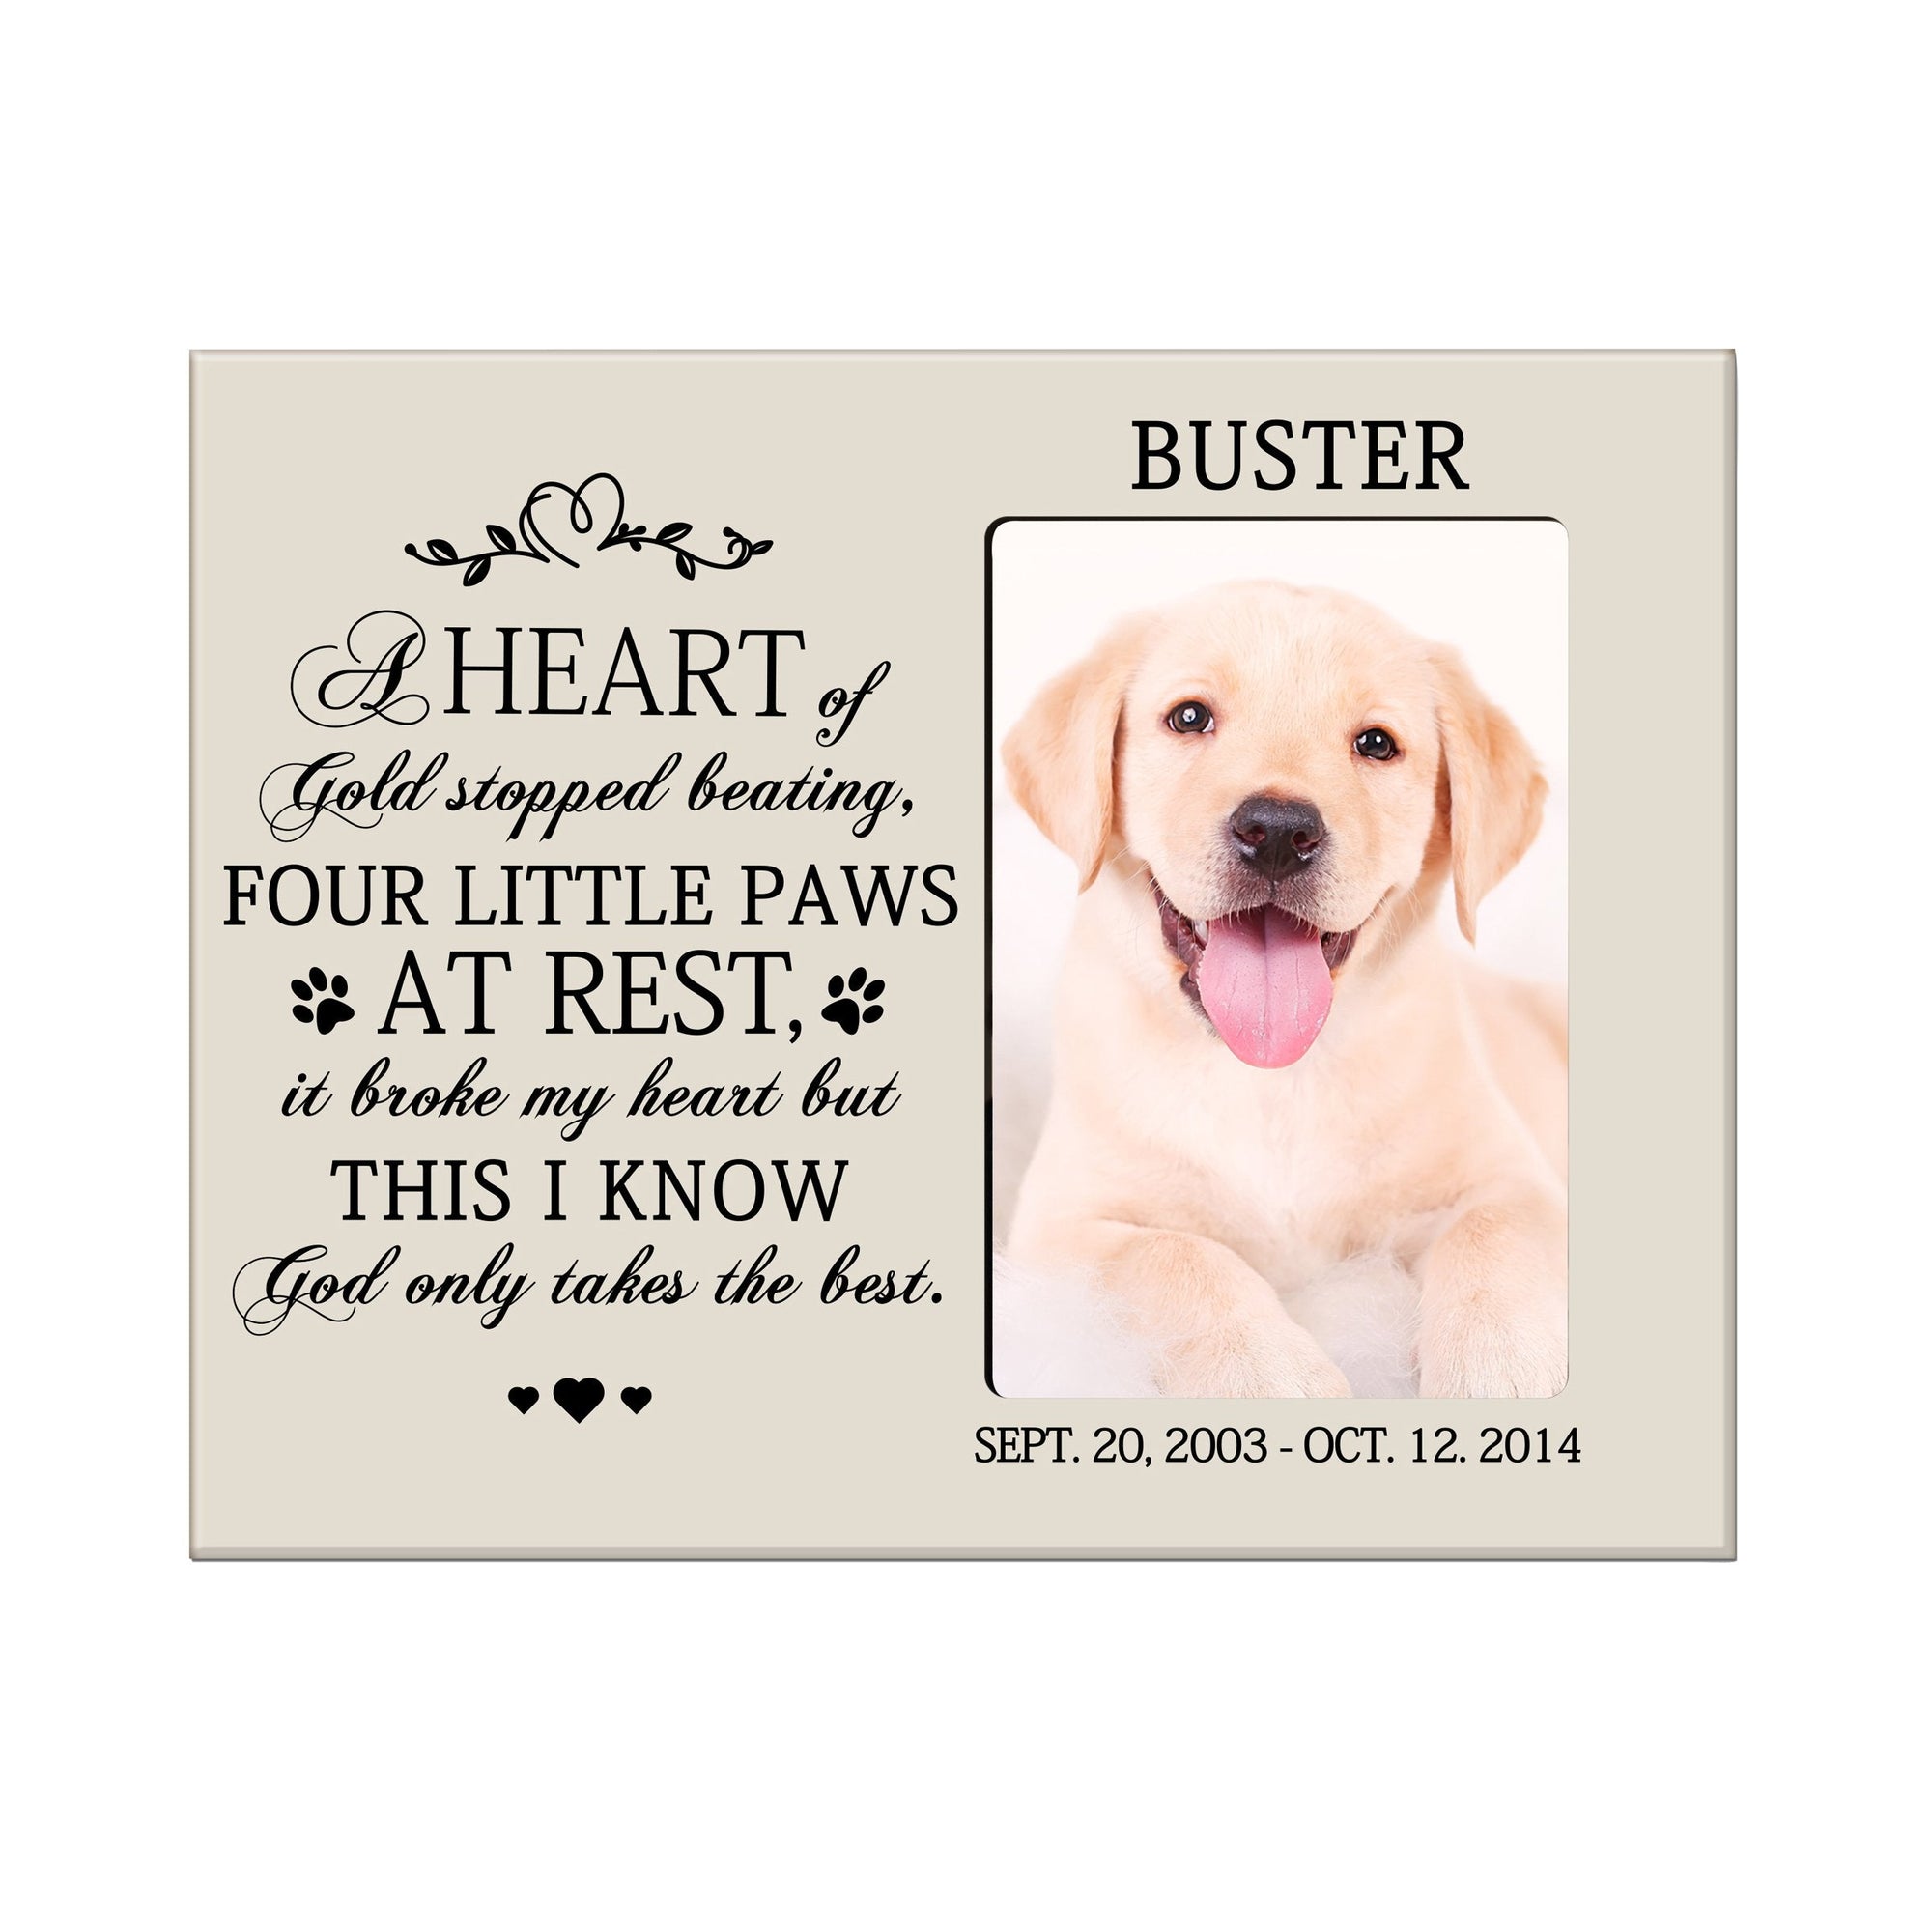 8x10 Ivory Pet Memorial Picture Frame with the phrase "A Heart of Gold"